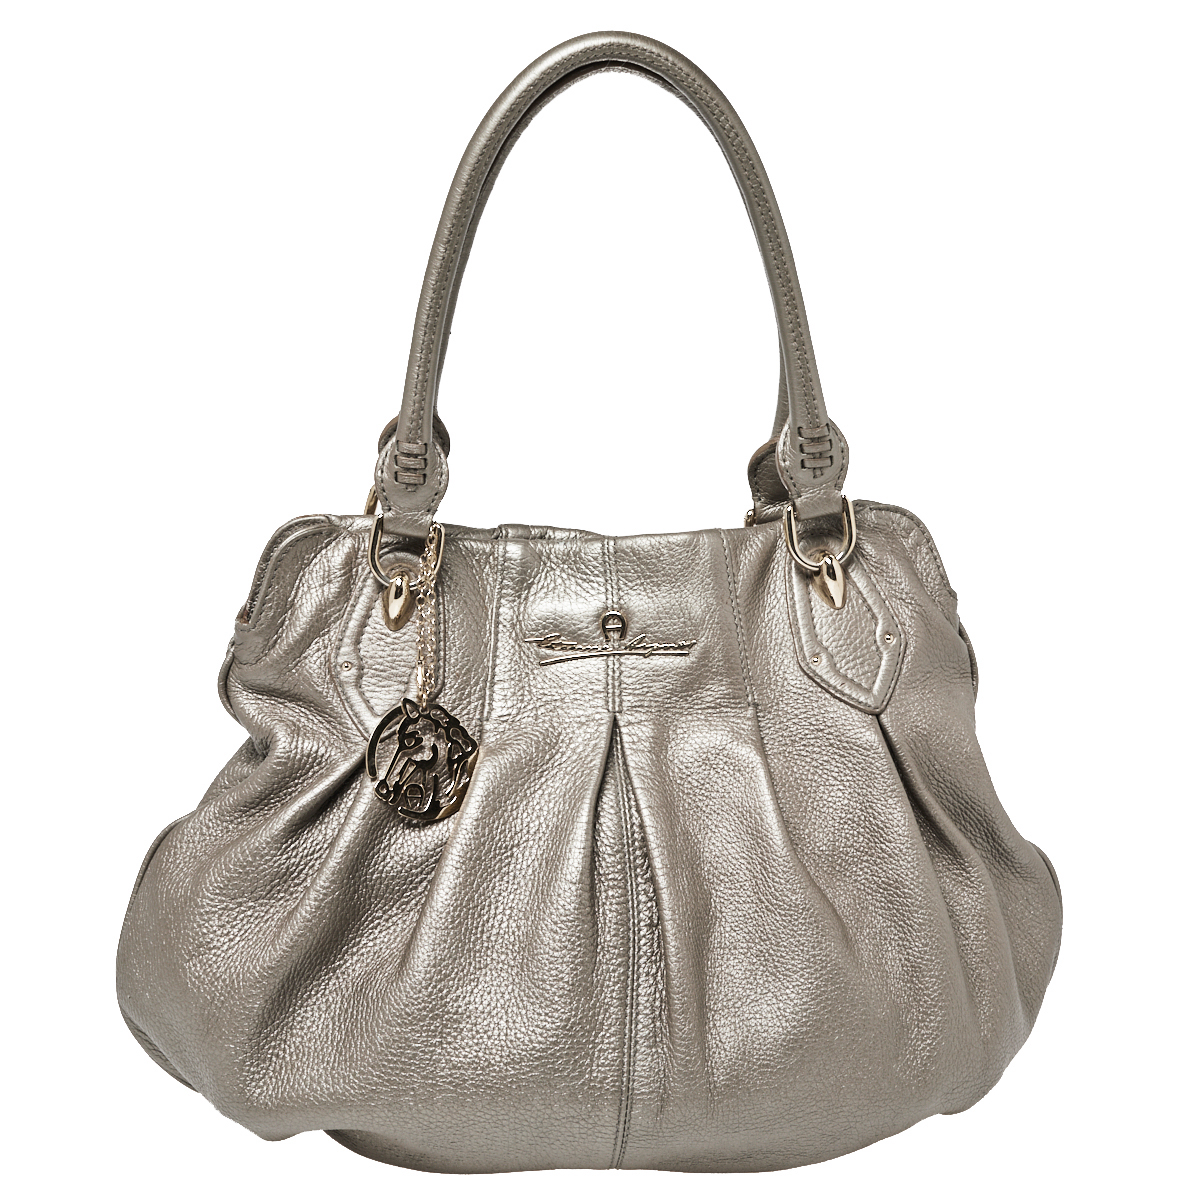 Pre-owned Aigner Metallic Grey Leather Satchel